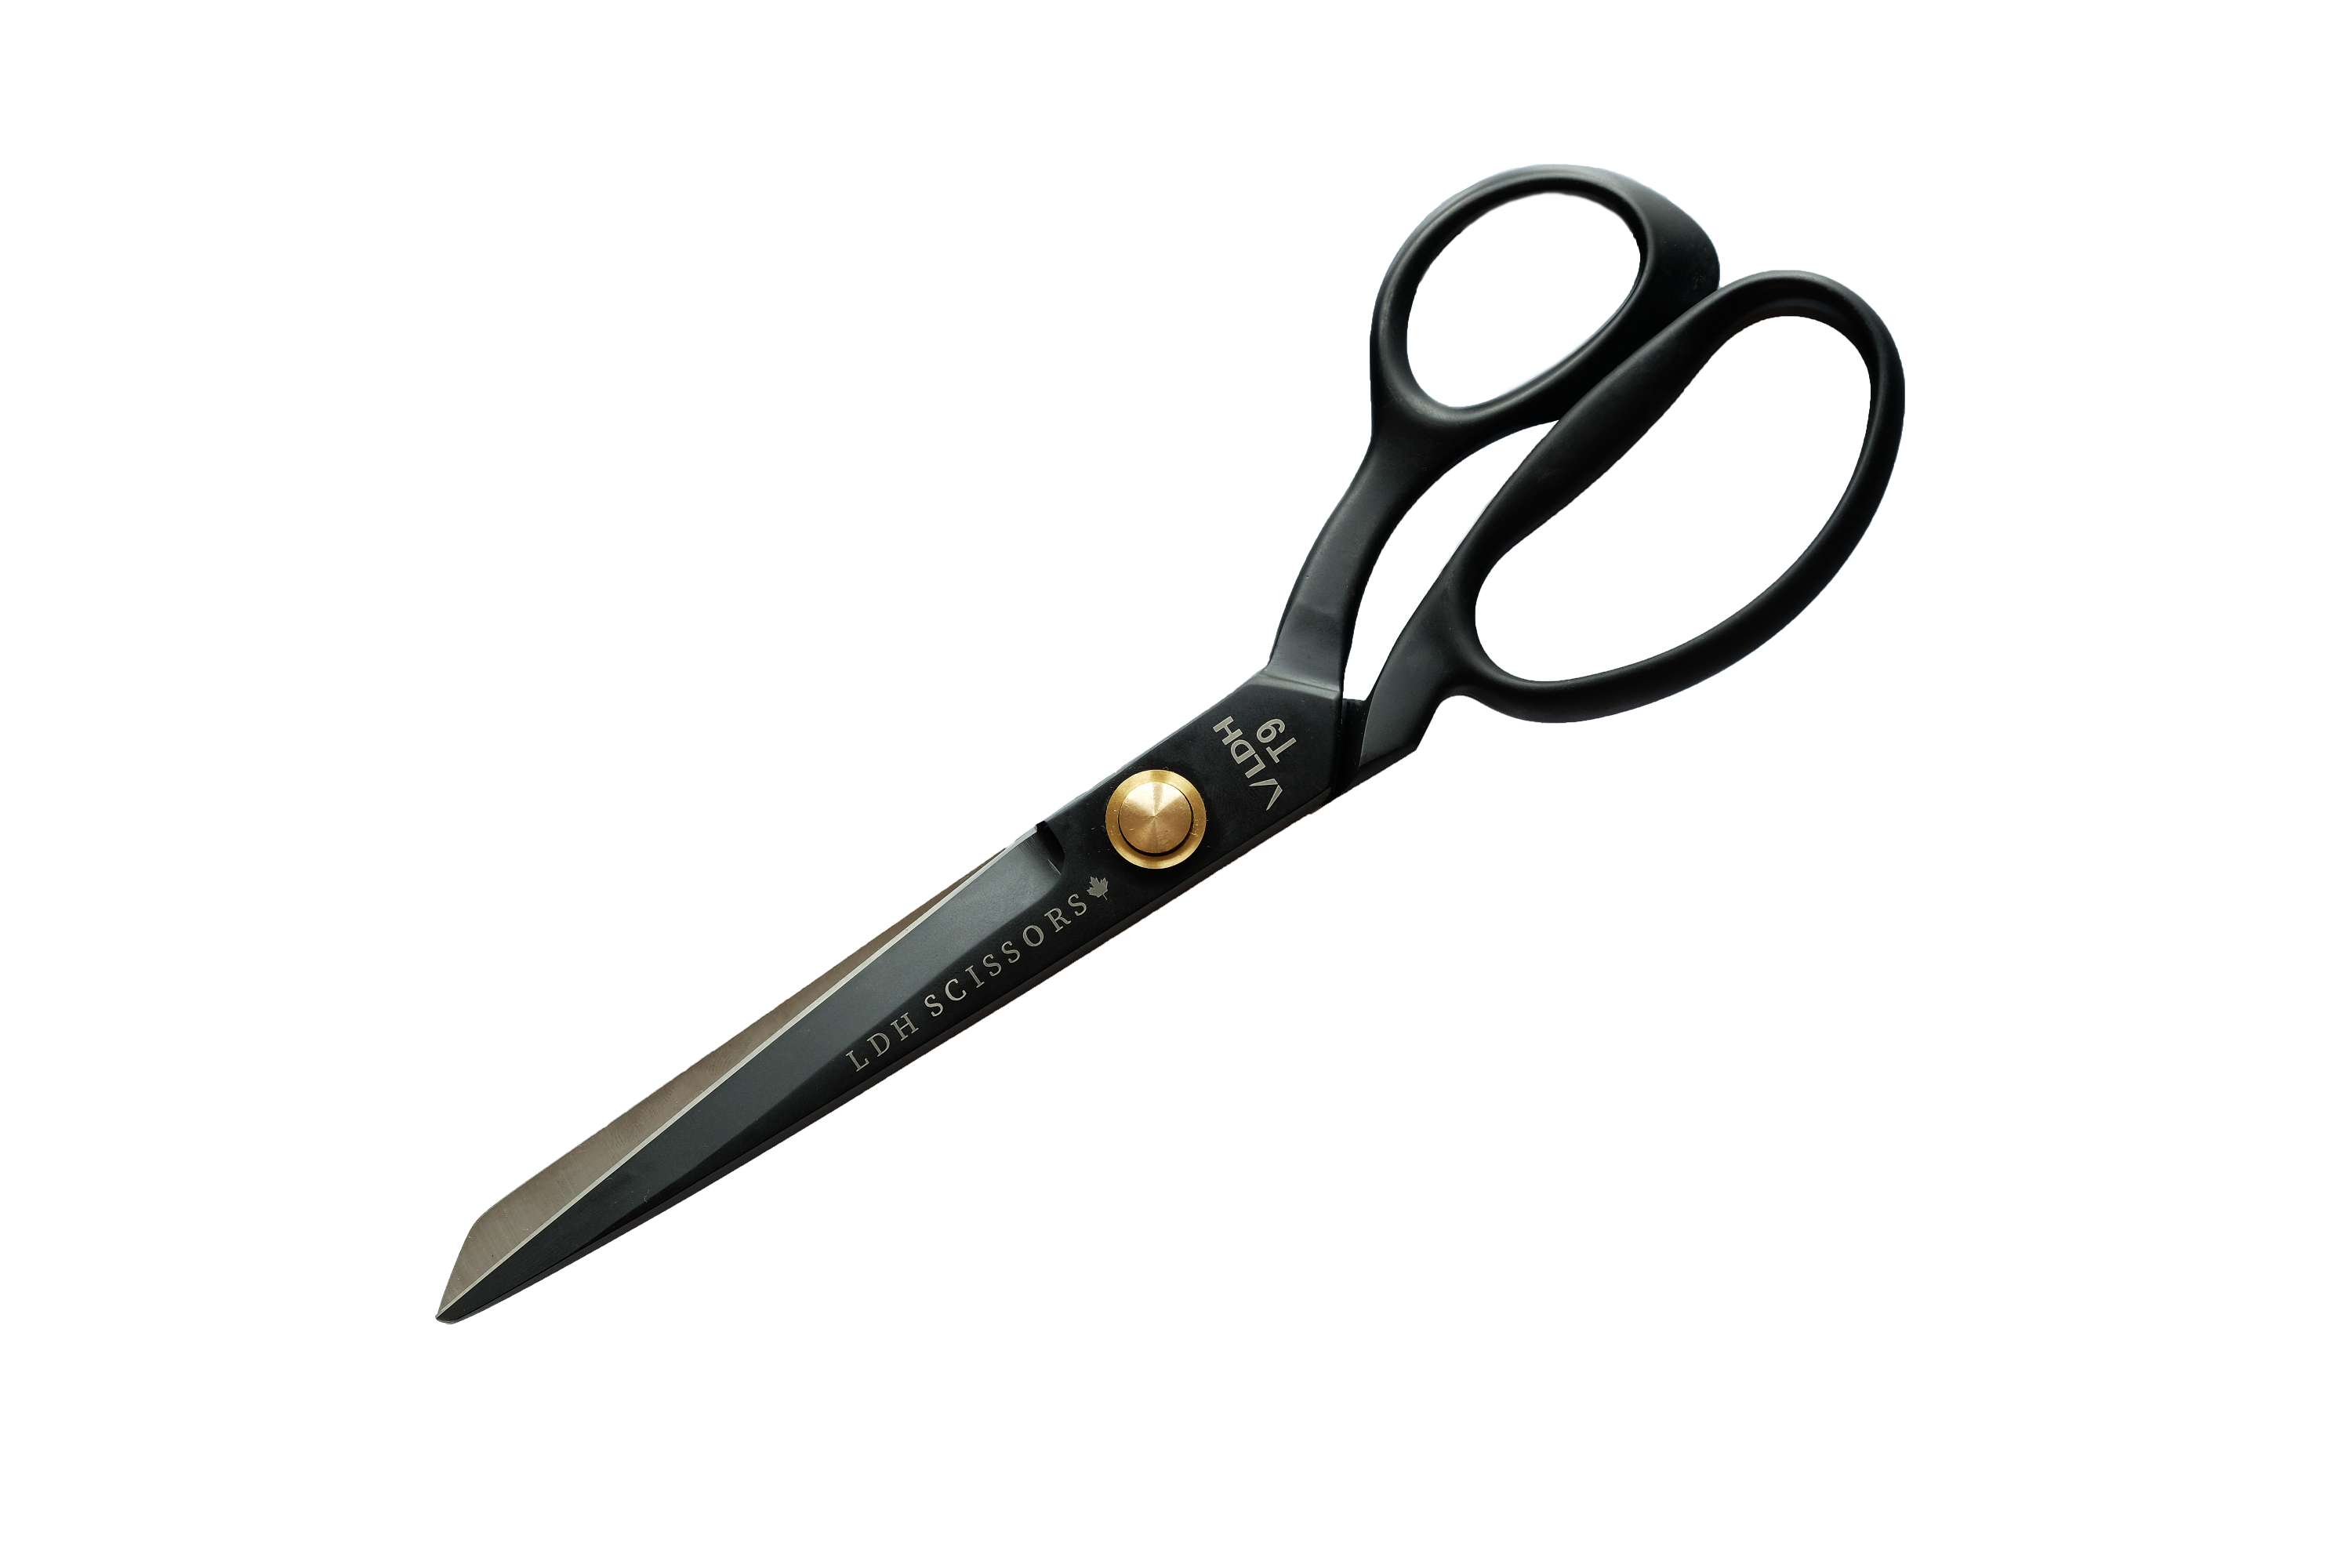 LDH Pinking Shears, Imperial – Scissors Up